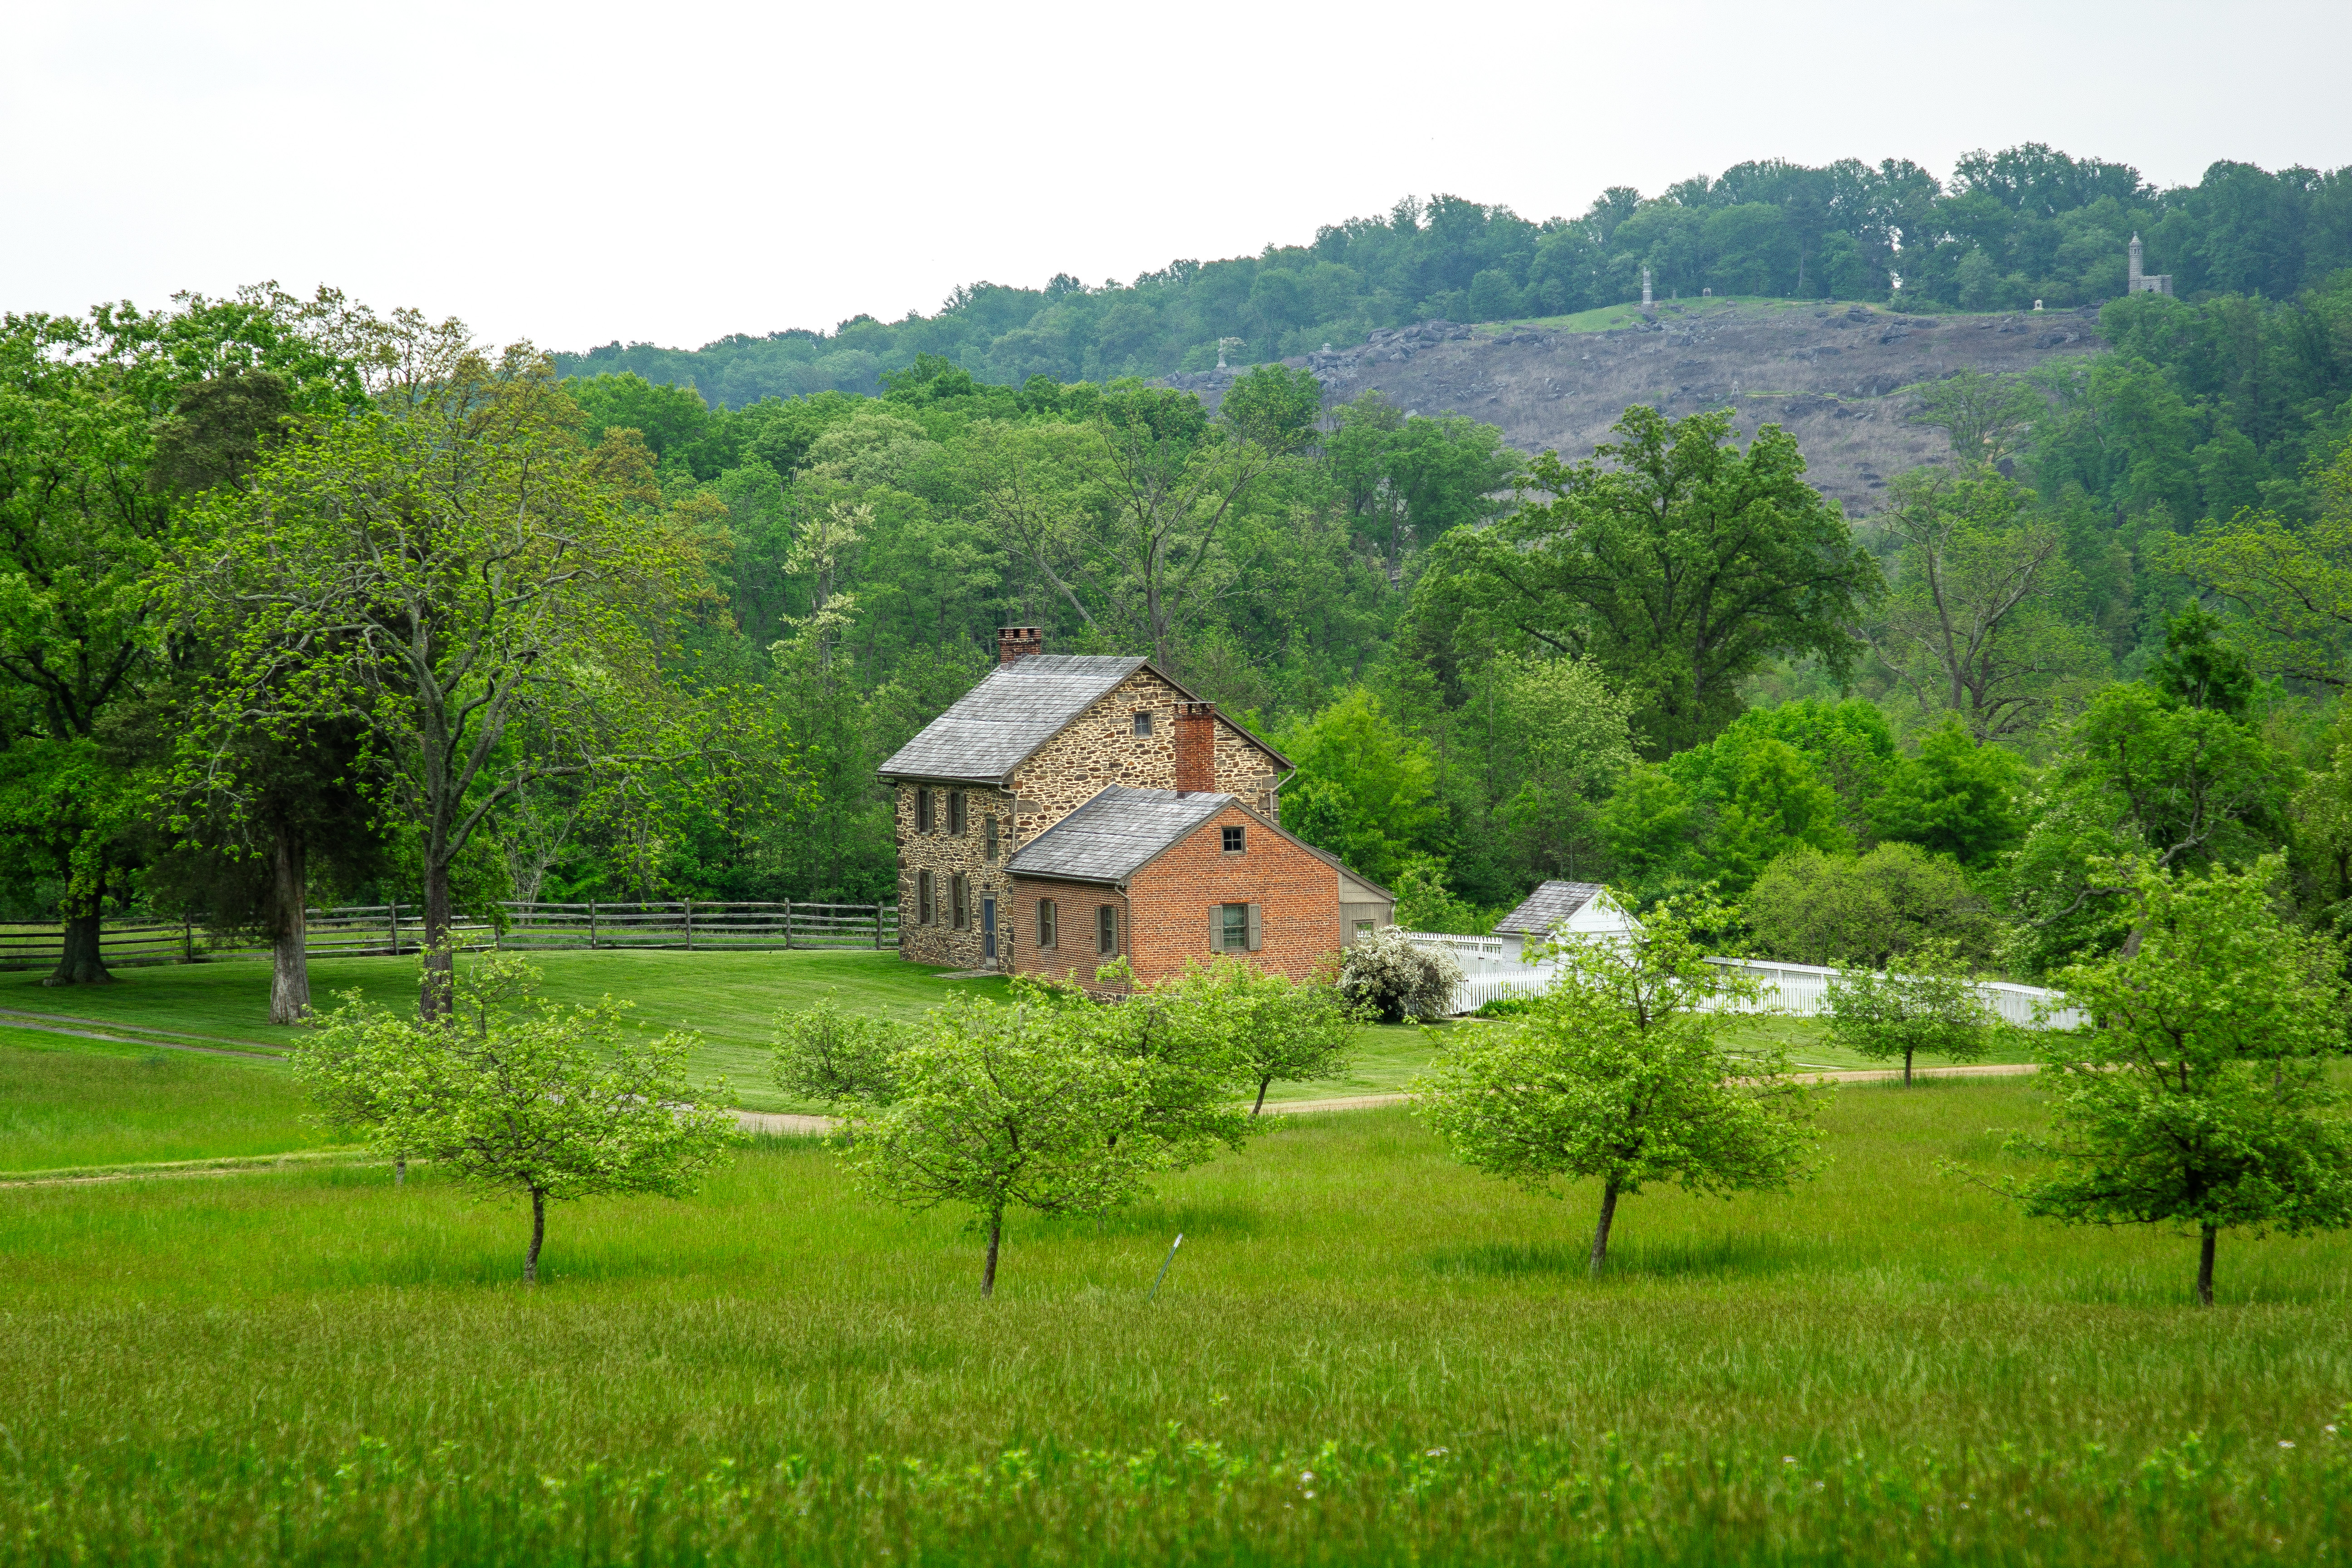 A stone and red brick house on grassy property with orchard trees sits in front of a heavily wooded area and a hill is in the distance.